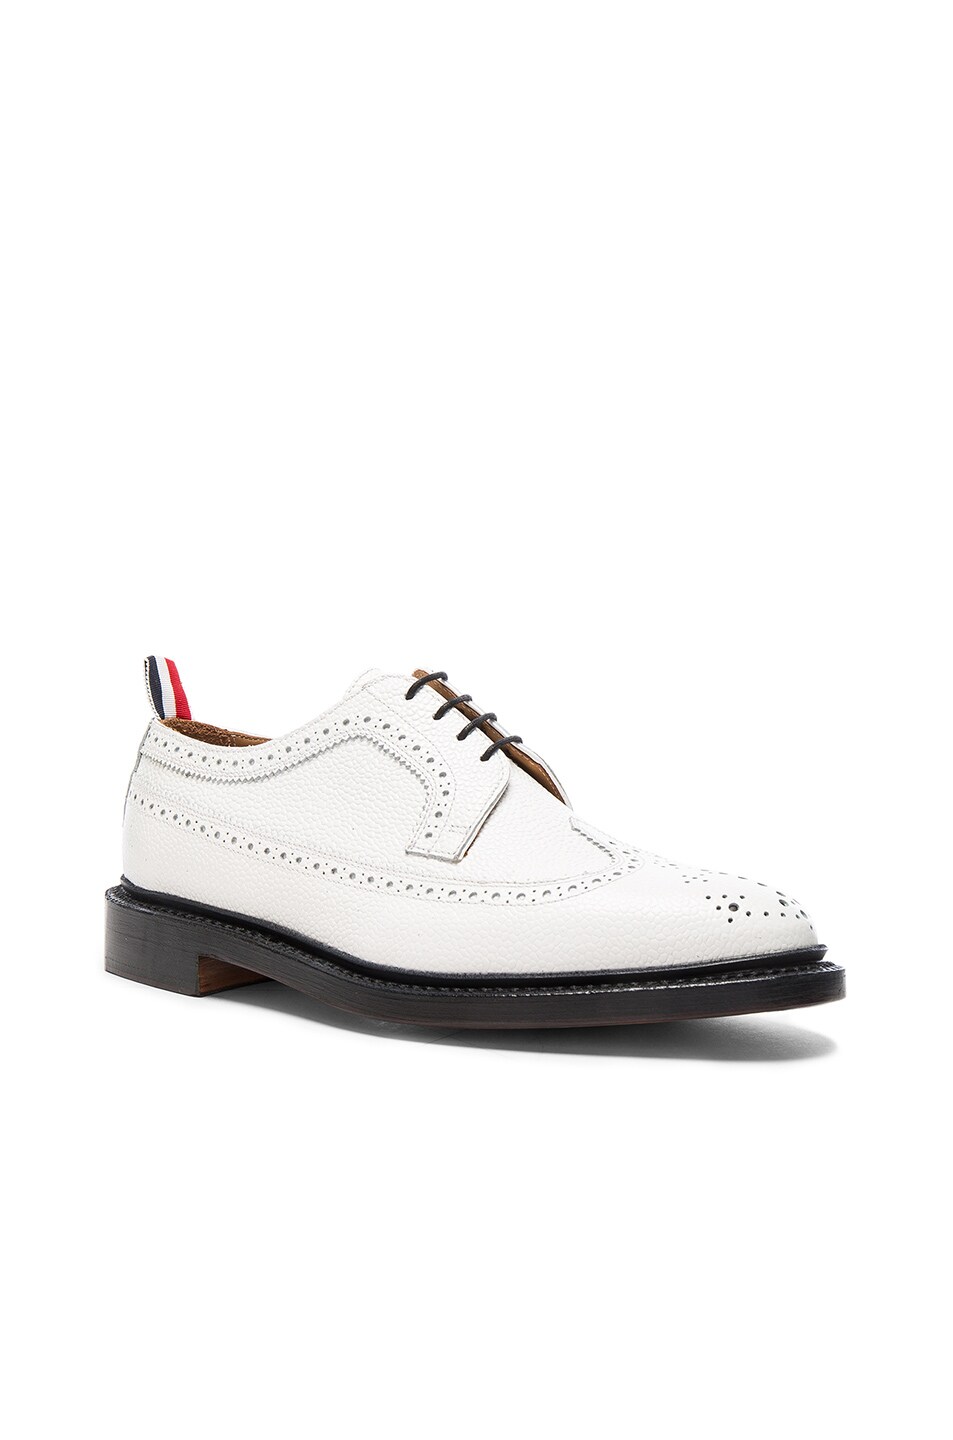 Image 1 of Thom Browne Contrast Longwing Leather Brogues in White